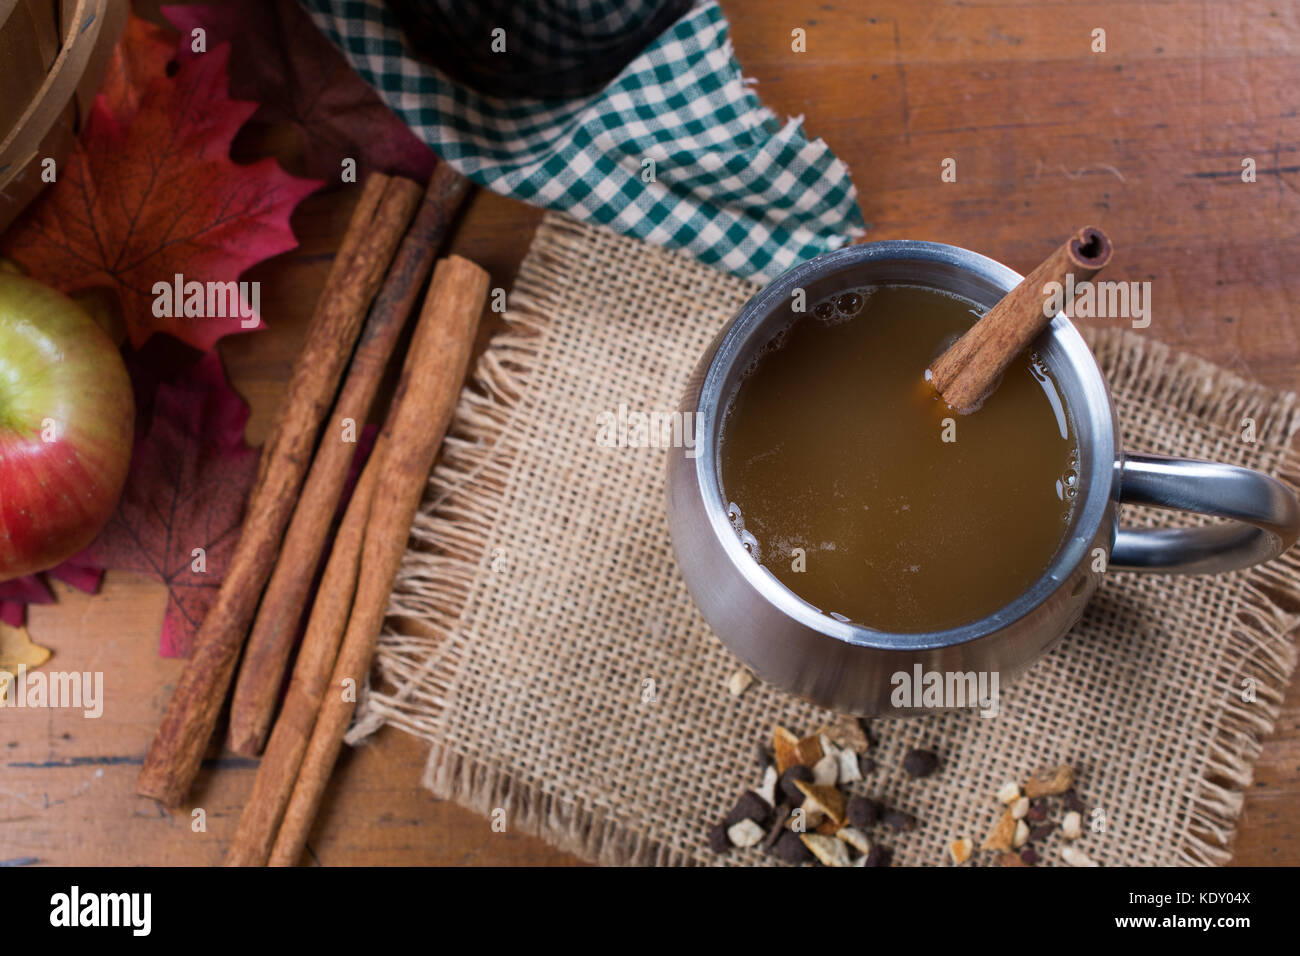 Top view of cup of apple cider in a rustic setting Stock Photo